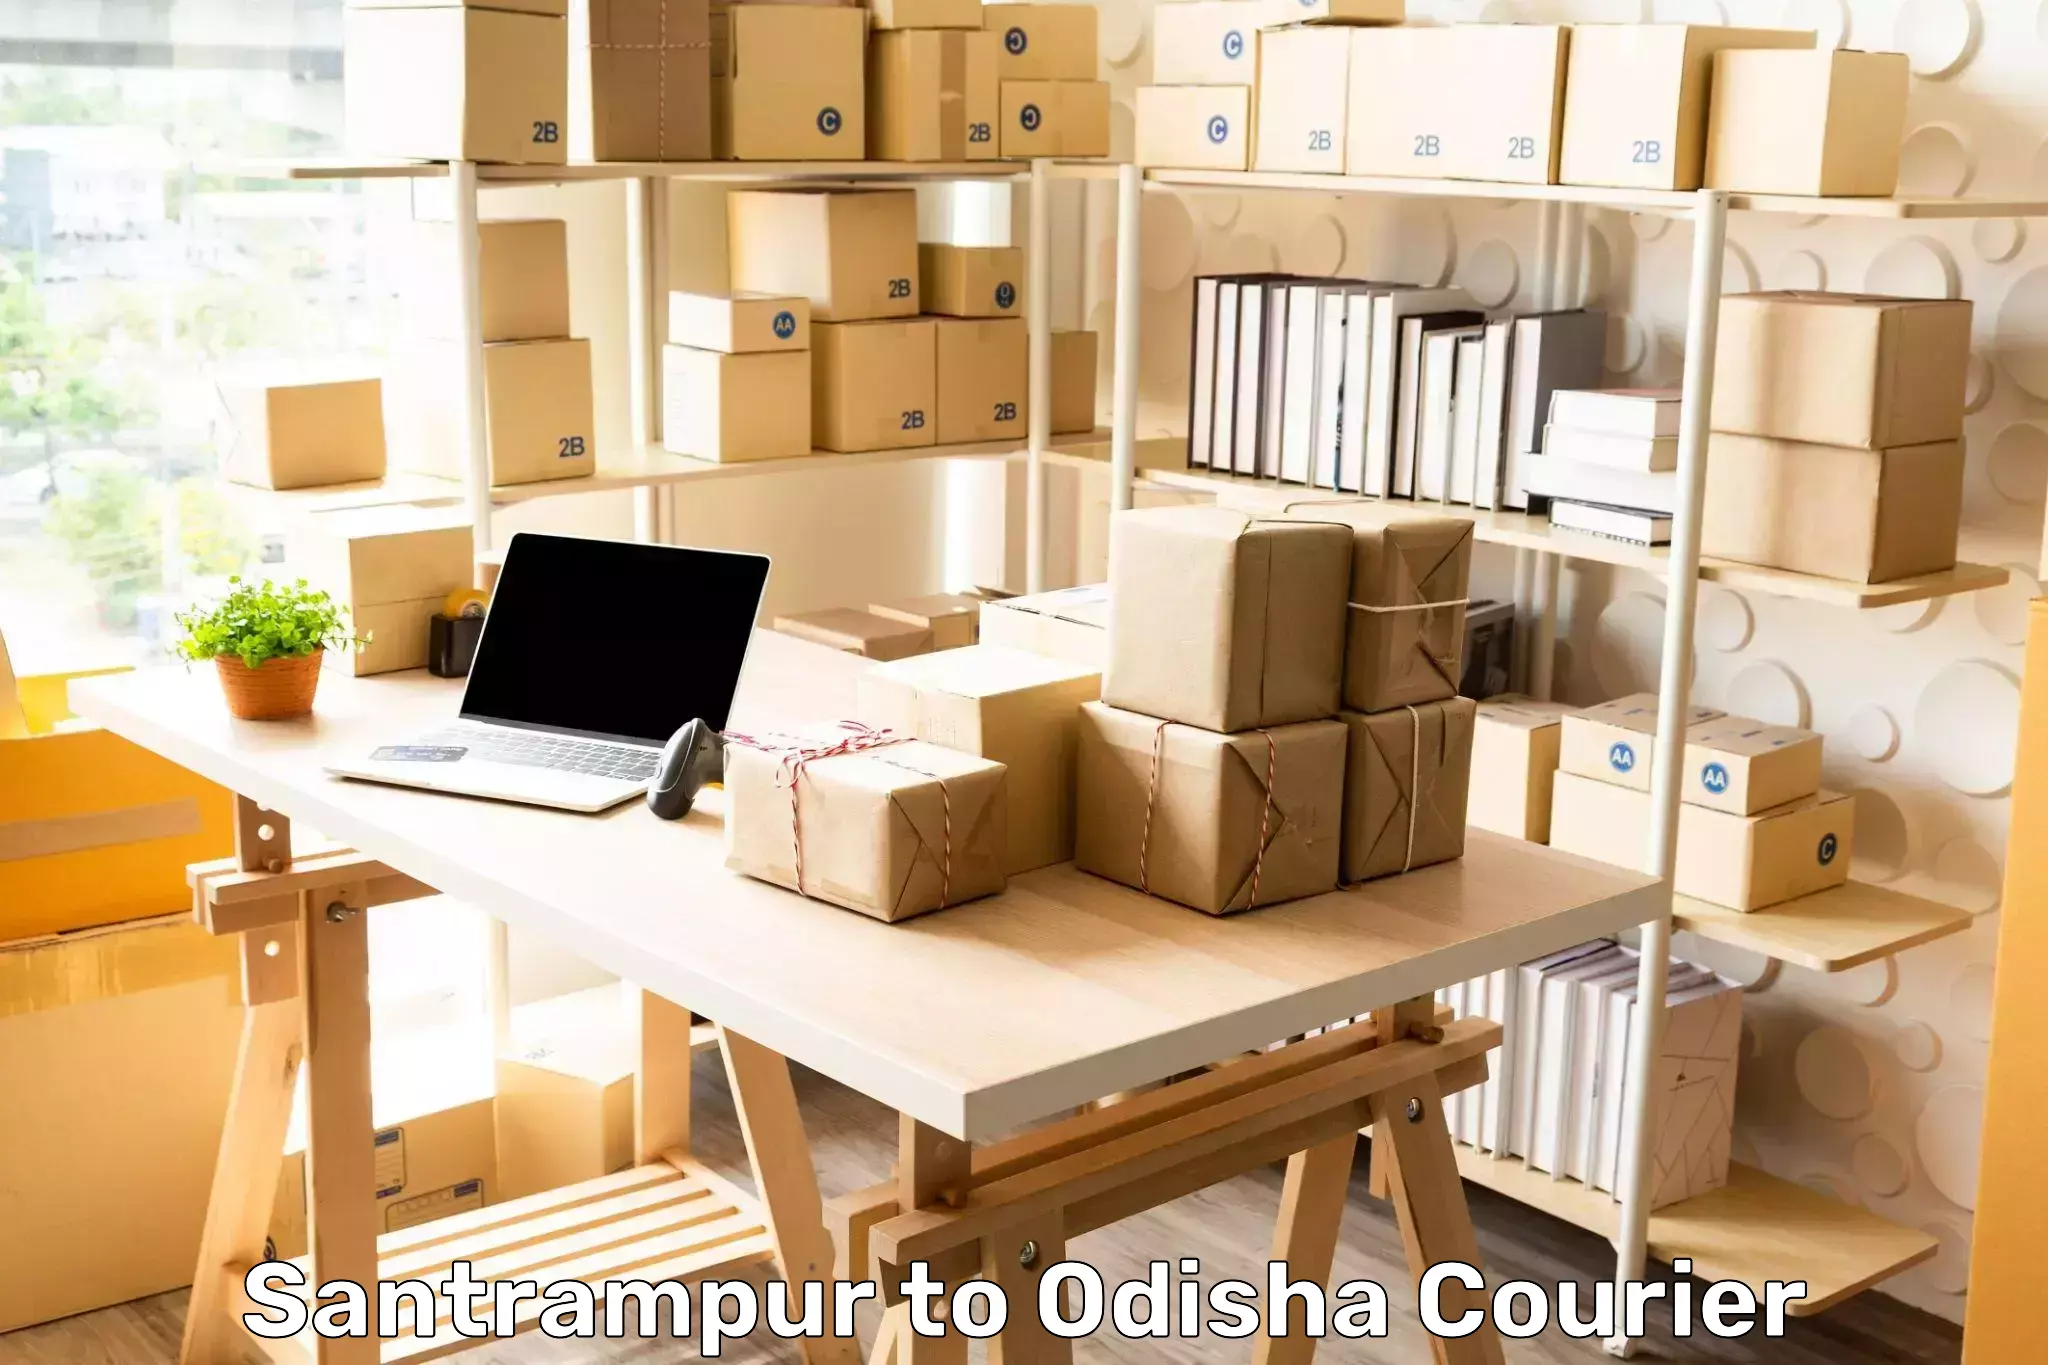 Affordable shipping solutions in Santrampur to Chandbali